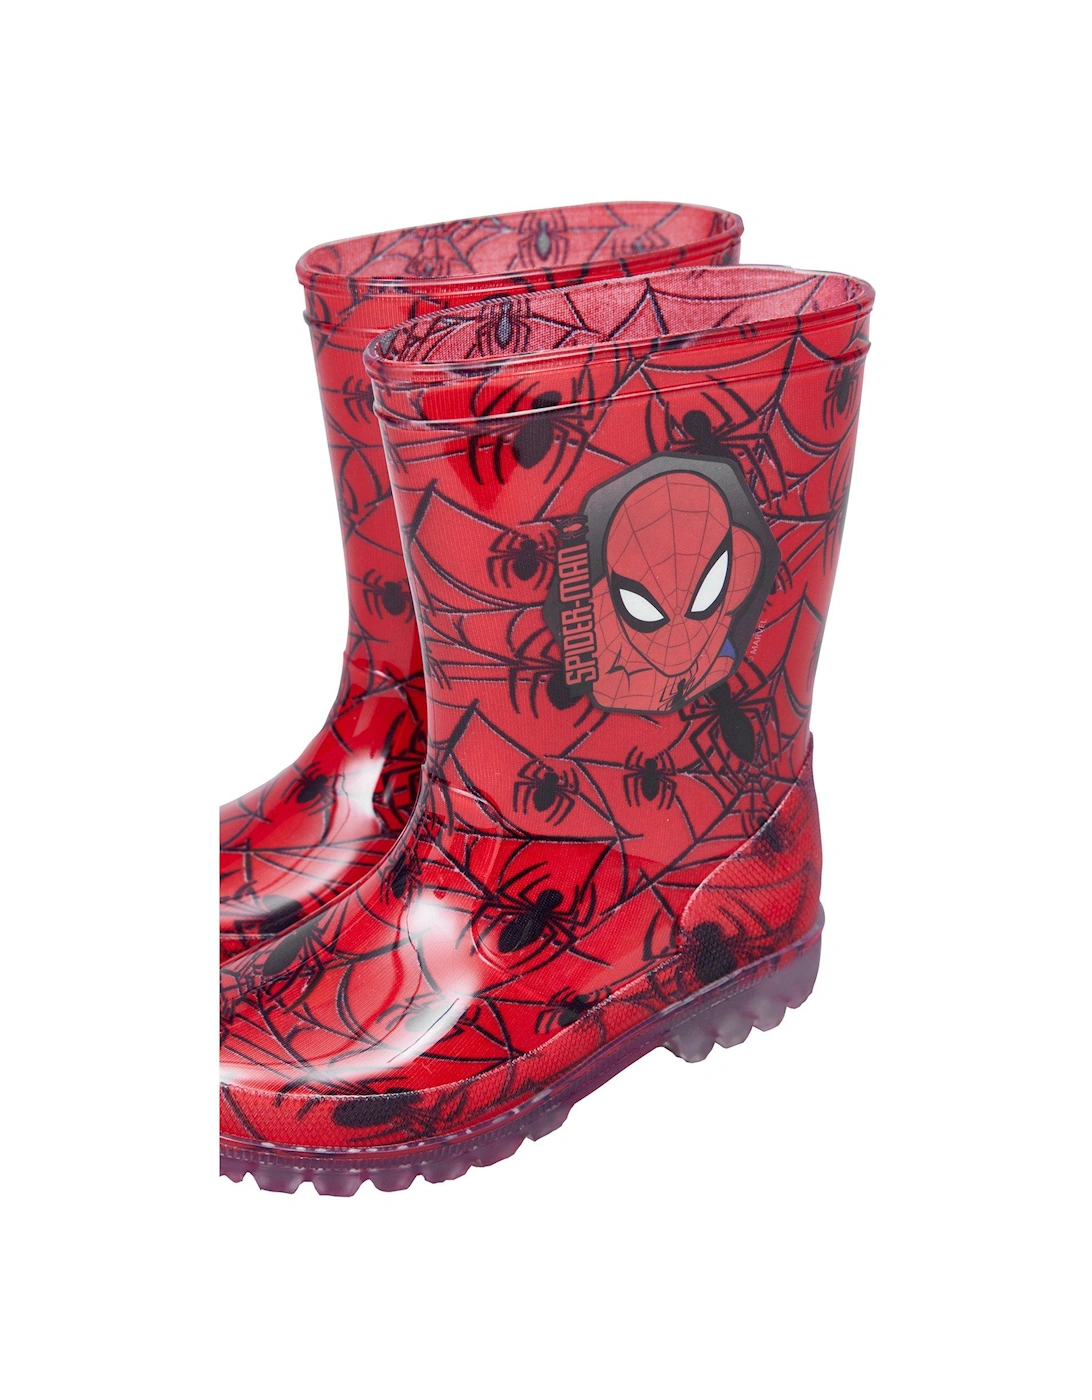 All Over Print Wellies - Red